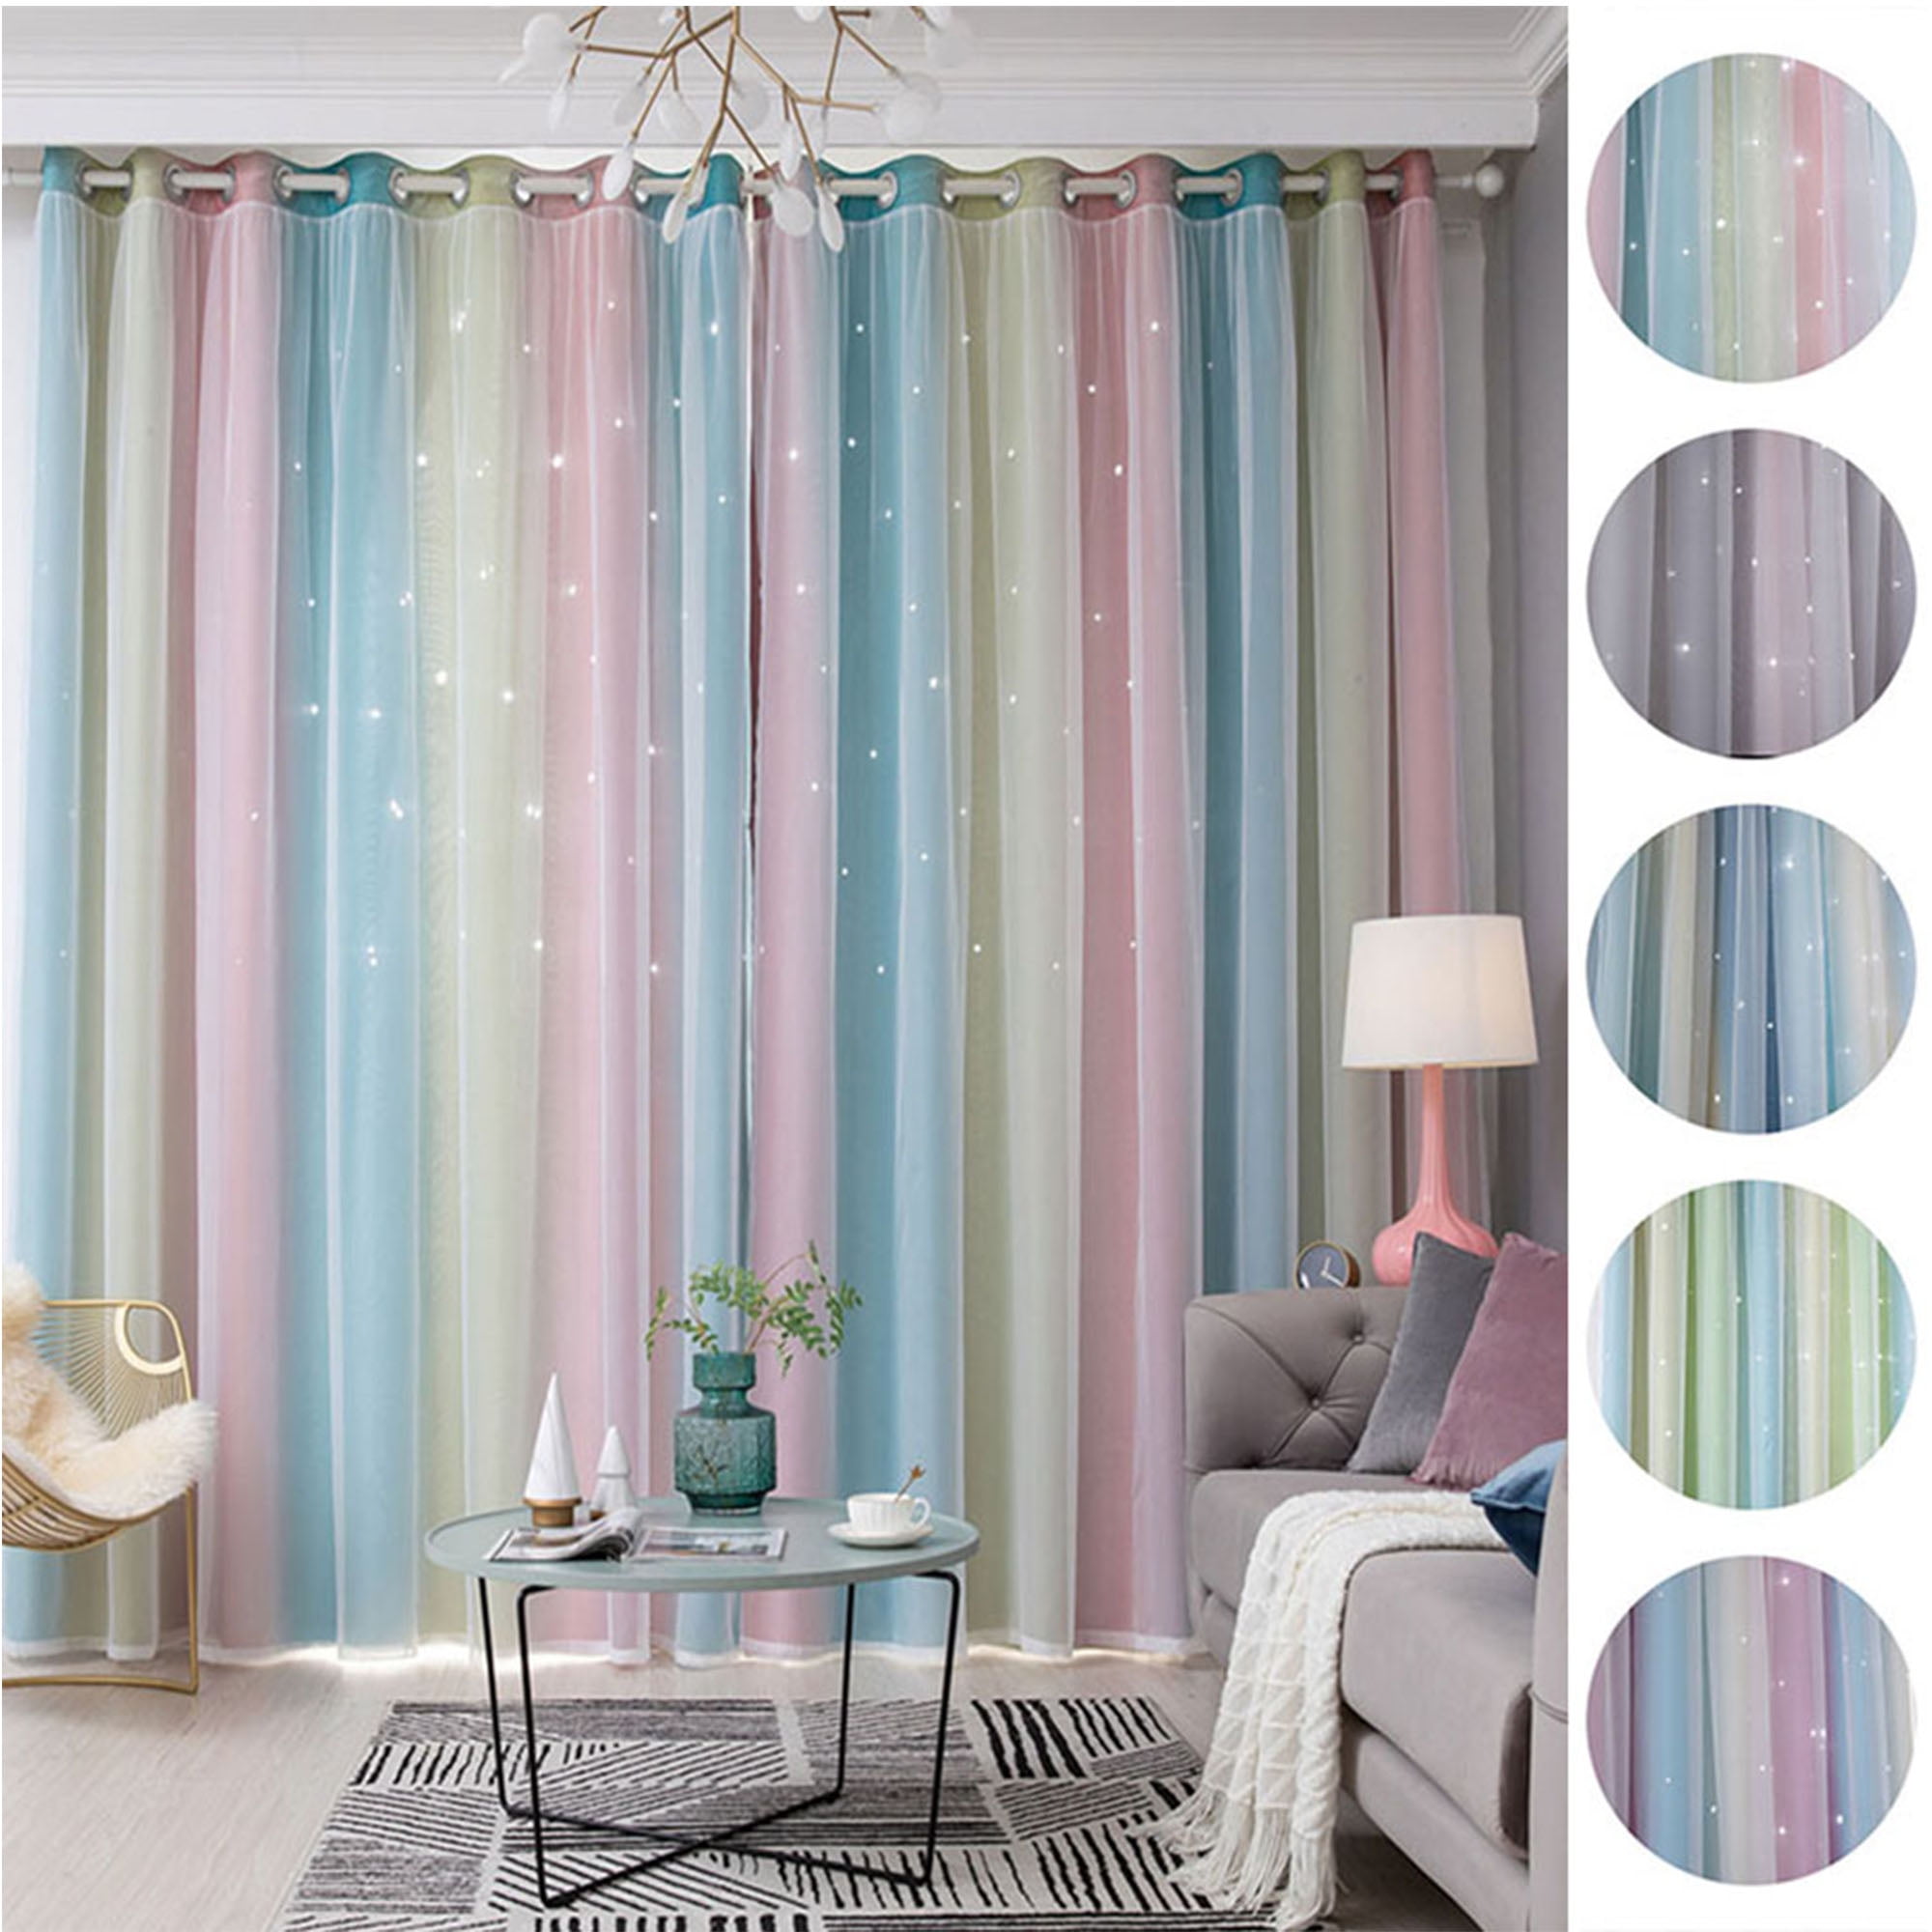 FlySheep Star Cutout Blackout Curtains 2 Panels for Kids Girls Bedroom Double Layer of Fabric & Tulle Star Cut Out Sparkle Gradient Stripe Window Curtains Pink Gray Stripes, 52x63 inches 2 in 1